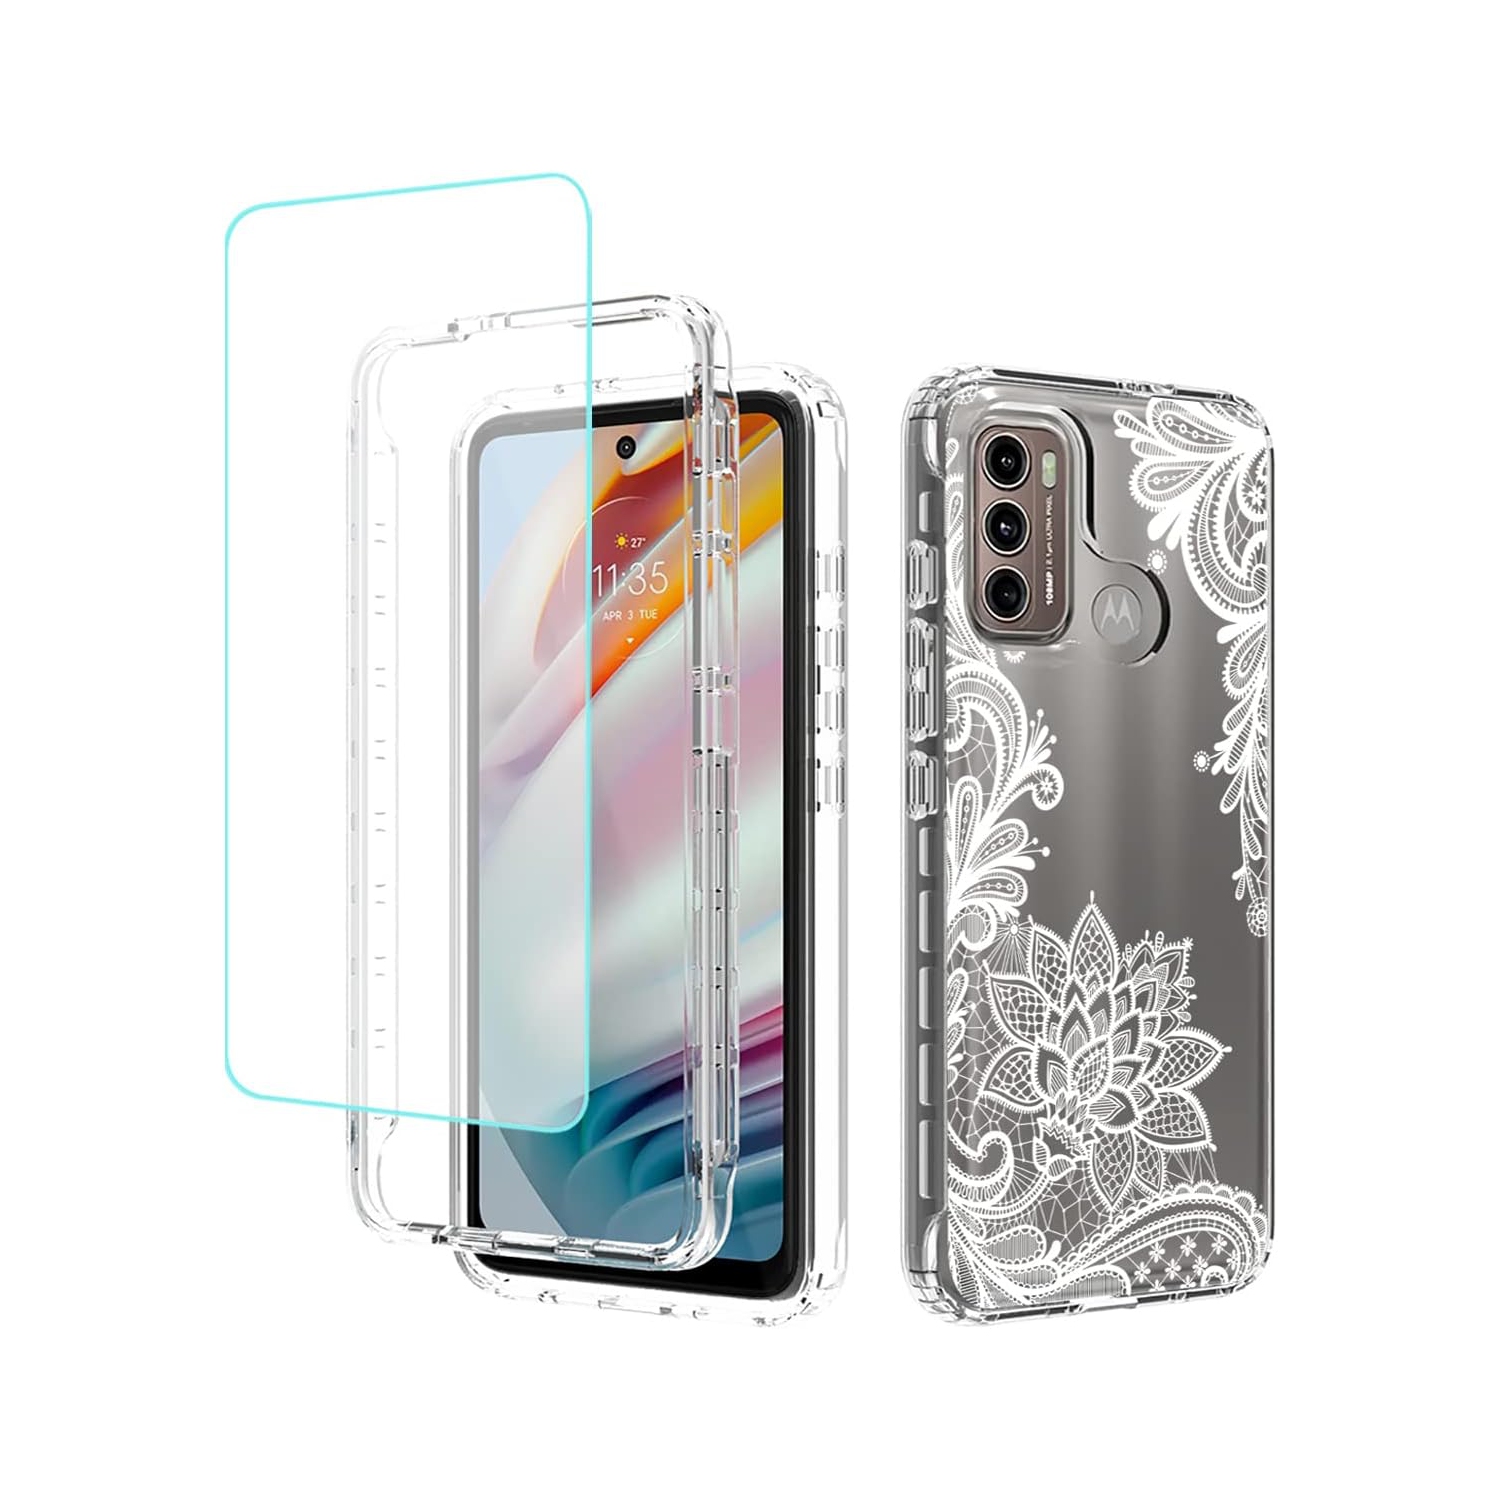 Case for Moto G60 Case, Motorola G60 XT2135-1 XT2135-2 with Tempered Glass Screen Protector, Floral Design